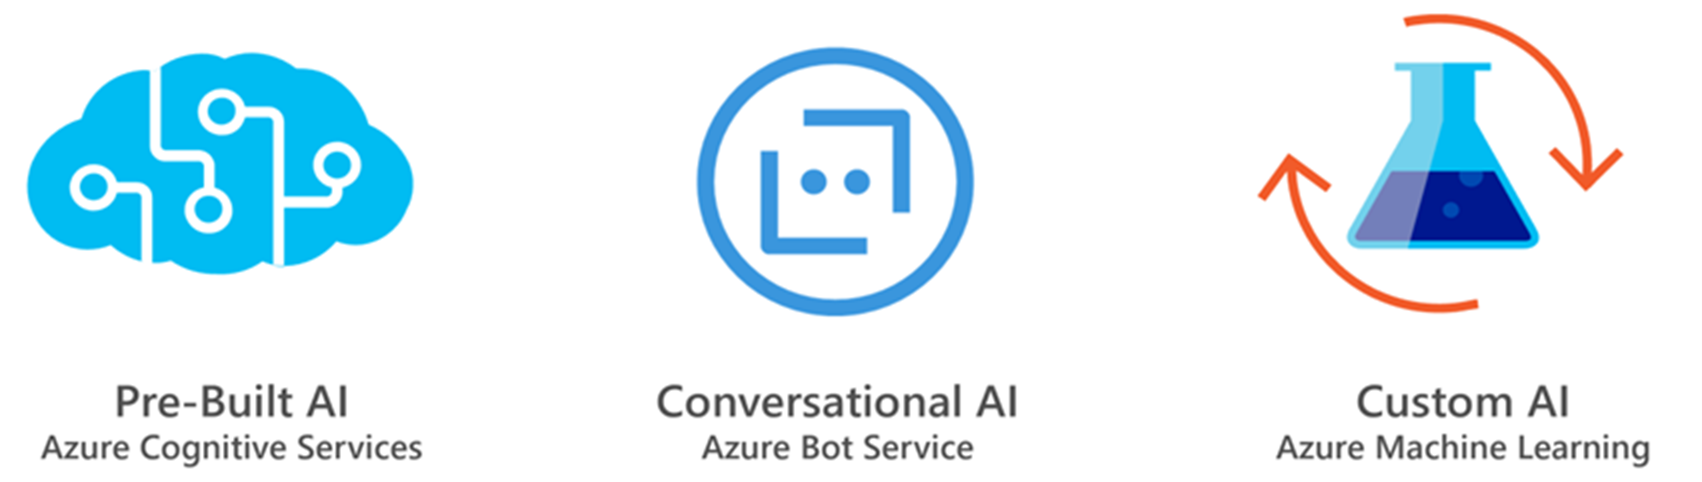 This image shows Azure AI services including Azure Cognitive Services (which offers pre-built AI), Azure Bot Service (which offers conversational AI), and Azure Machine Learning (which offers custom AI).